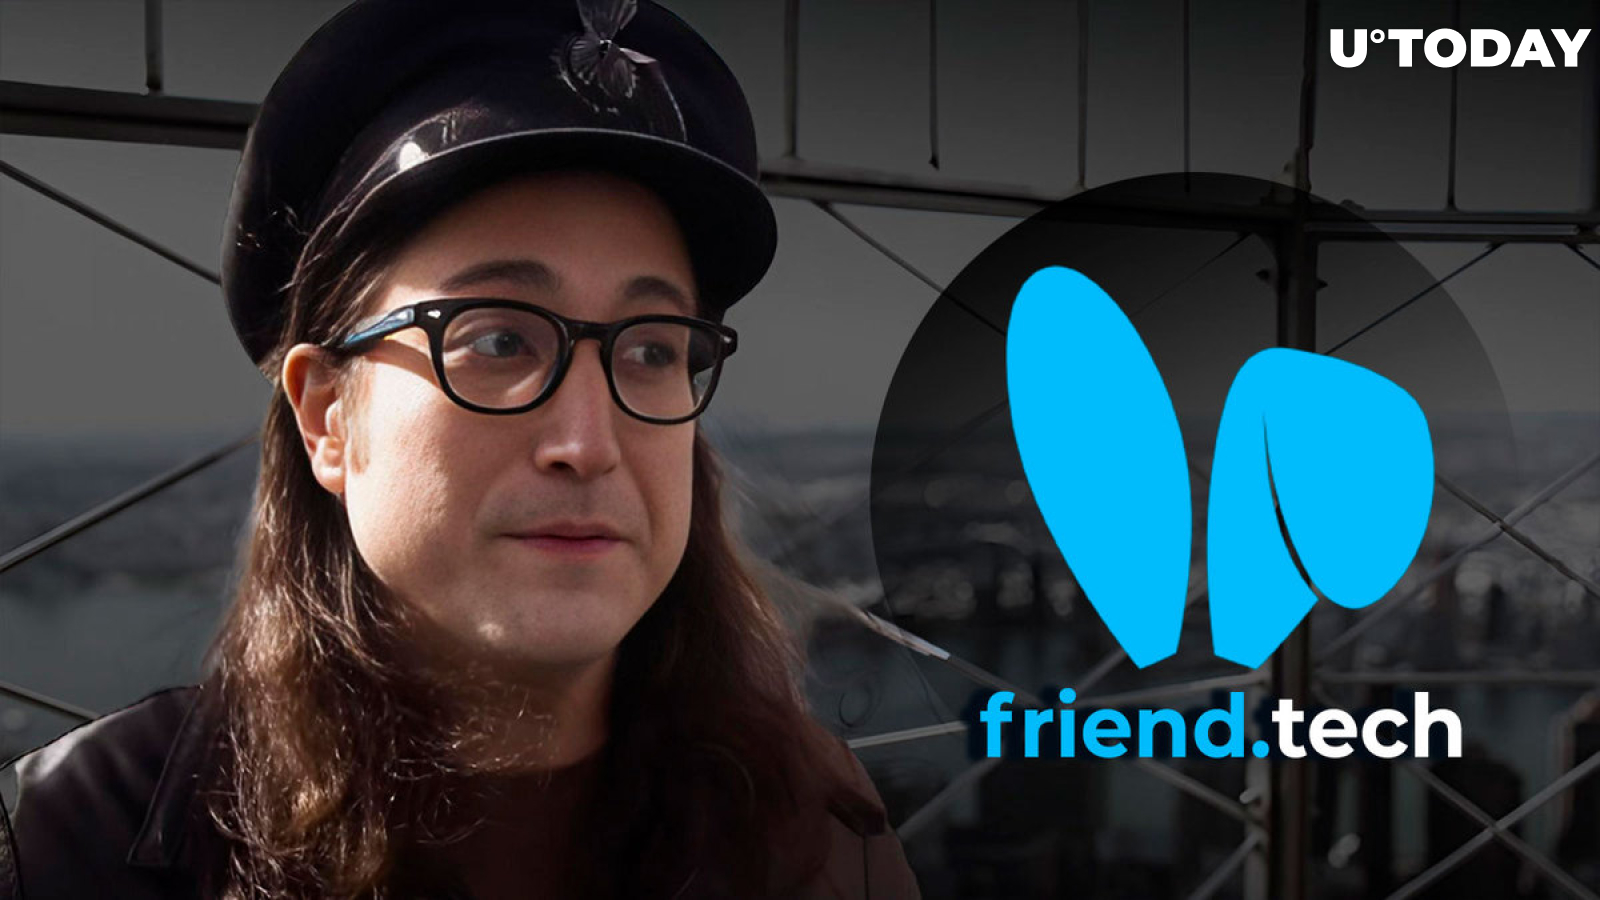 John Lennon's Son Joins Friend Tech: Hottest Trend in Crypto Right Now